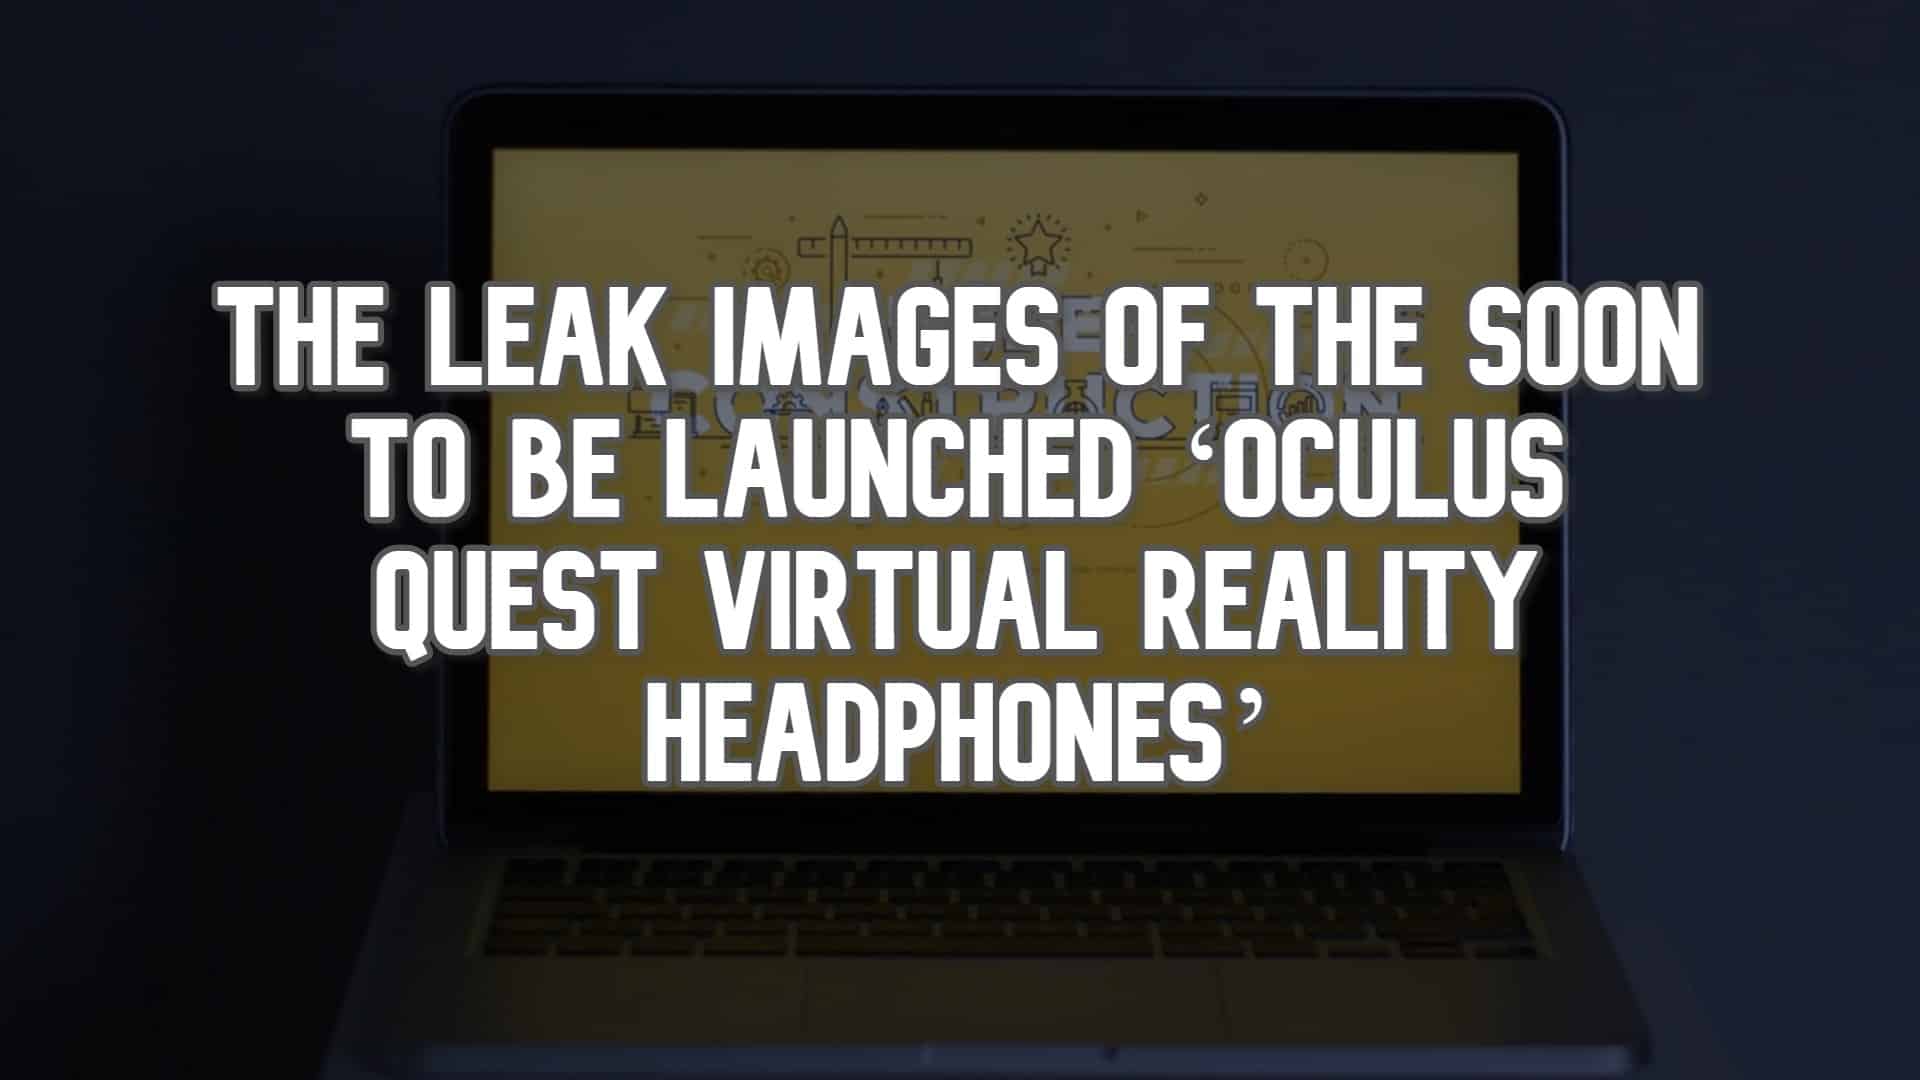 The Leak Images of the Soon To Be Launched ‘Oculus Quest Virtual Reality Headphones’